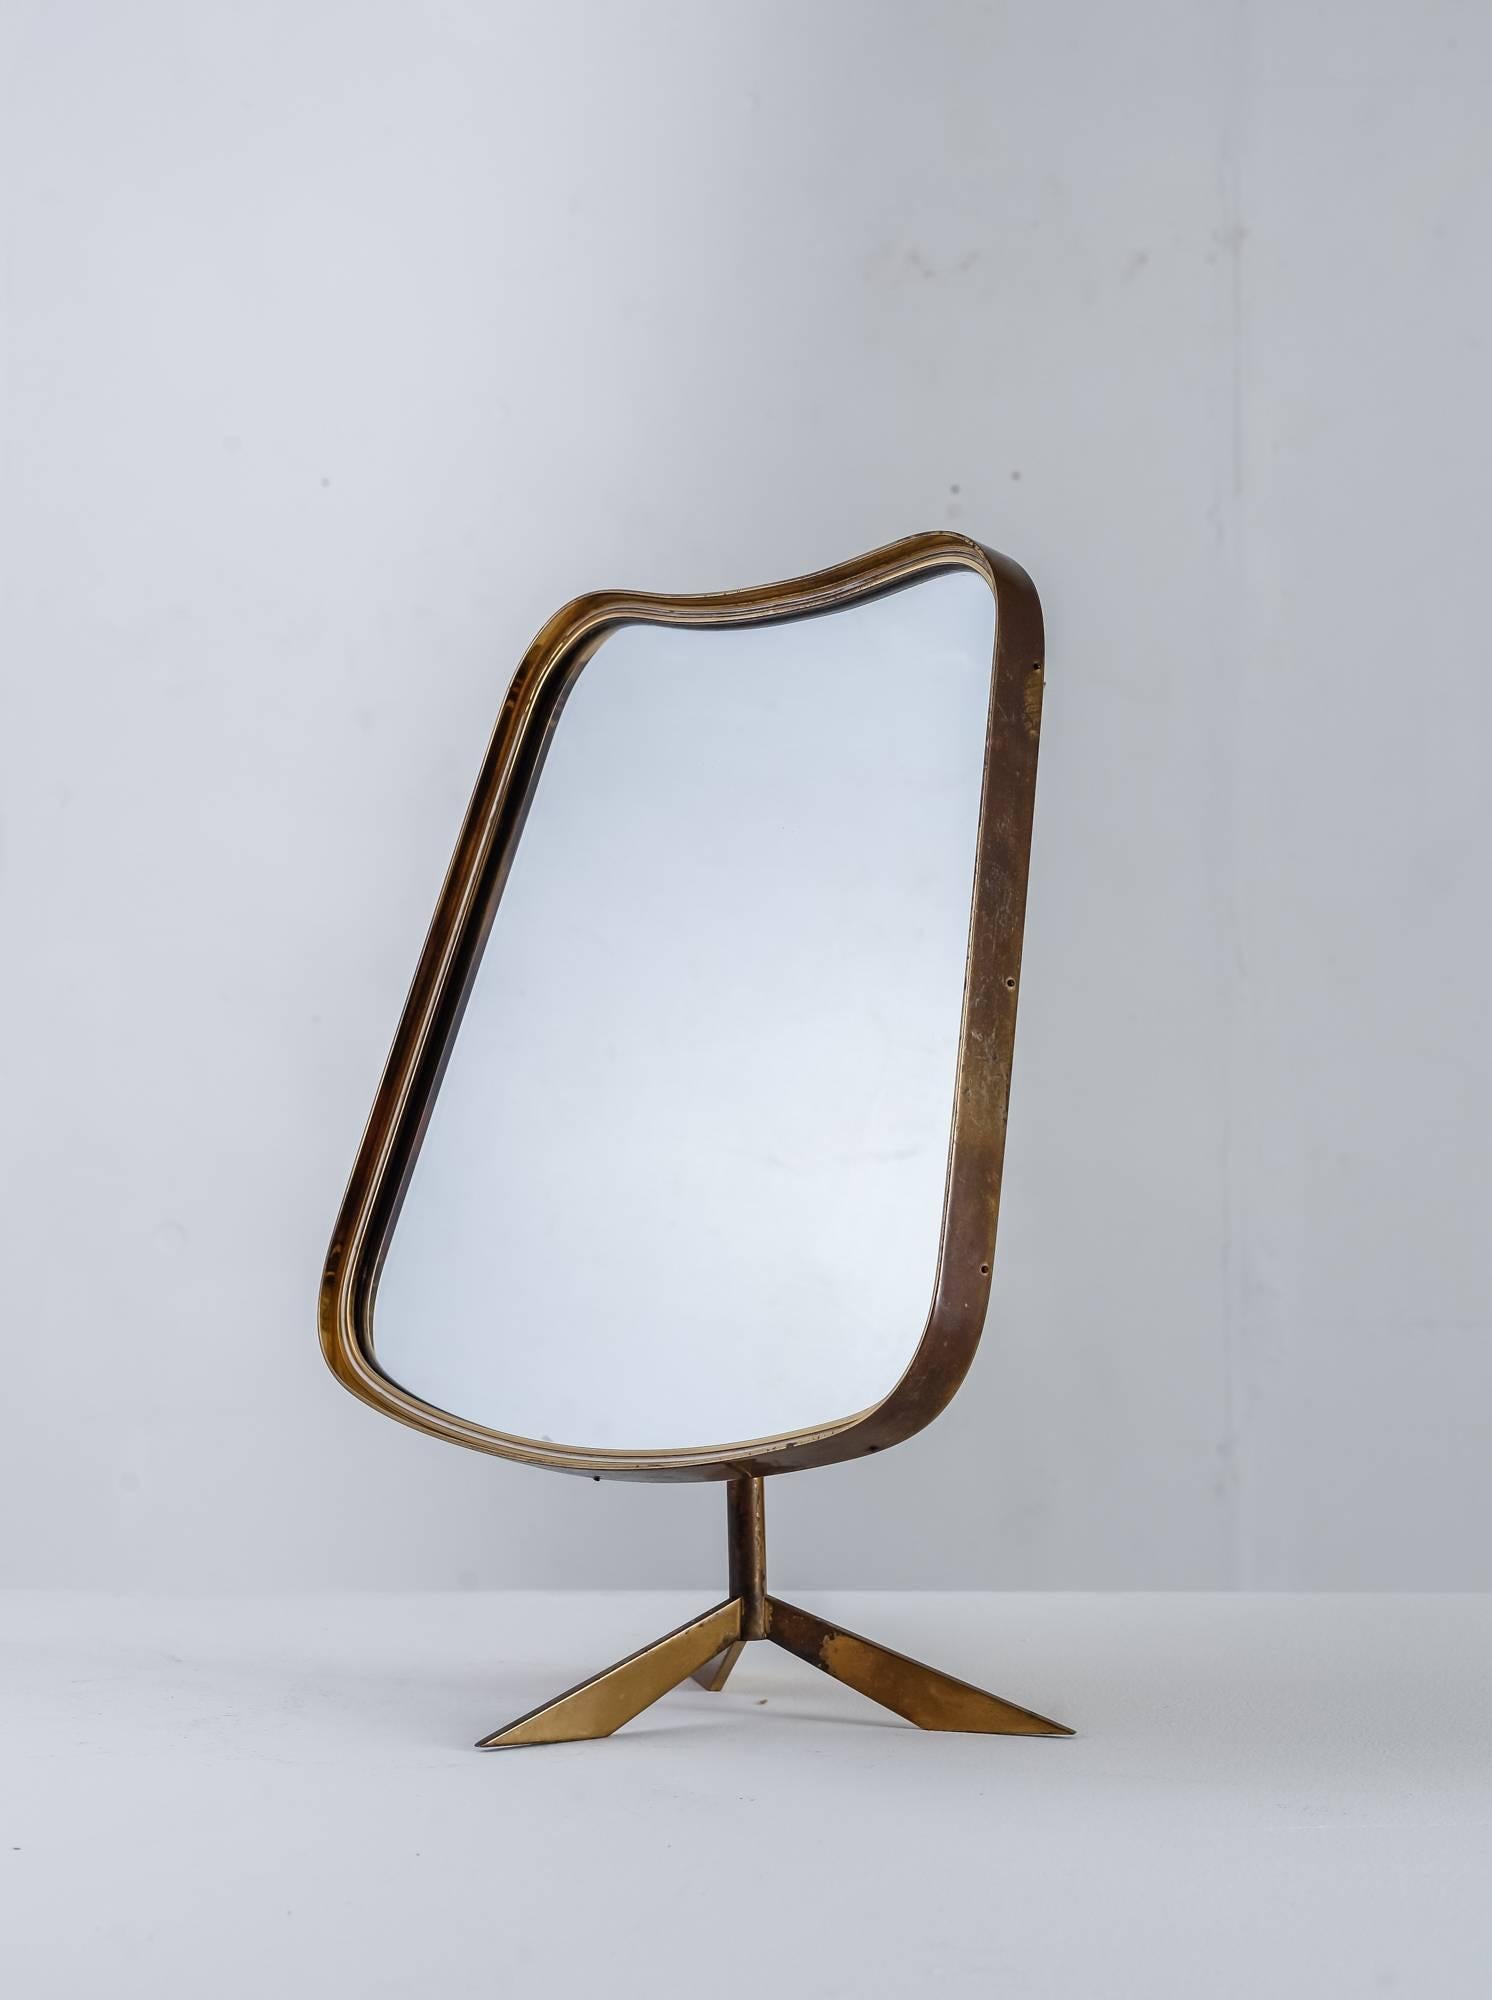 An adjustable brass console mirror with a curved frame on a tripod foot. 
The mirror can be positioned with the concave side of the frame up or down.